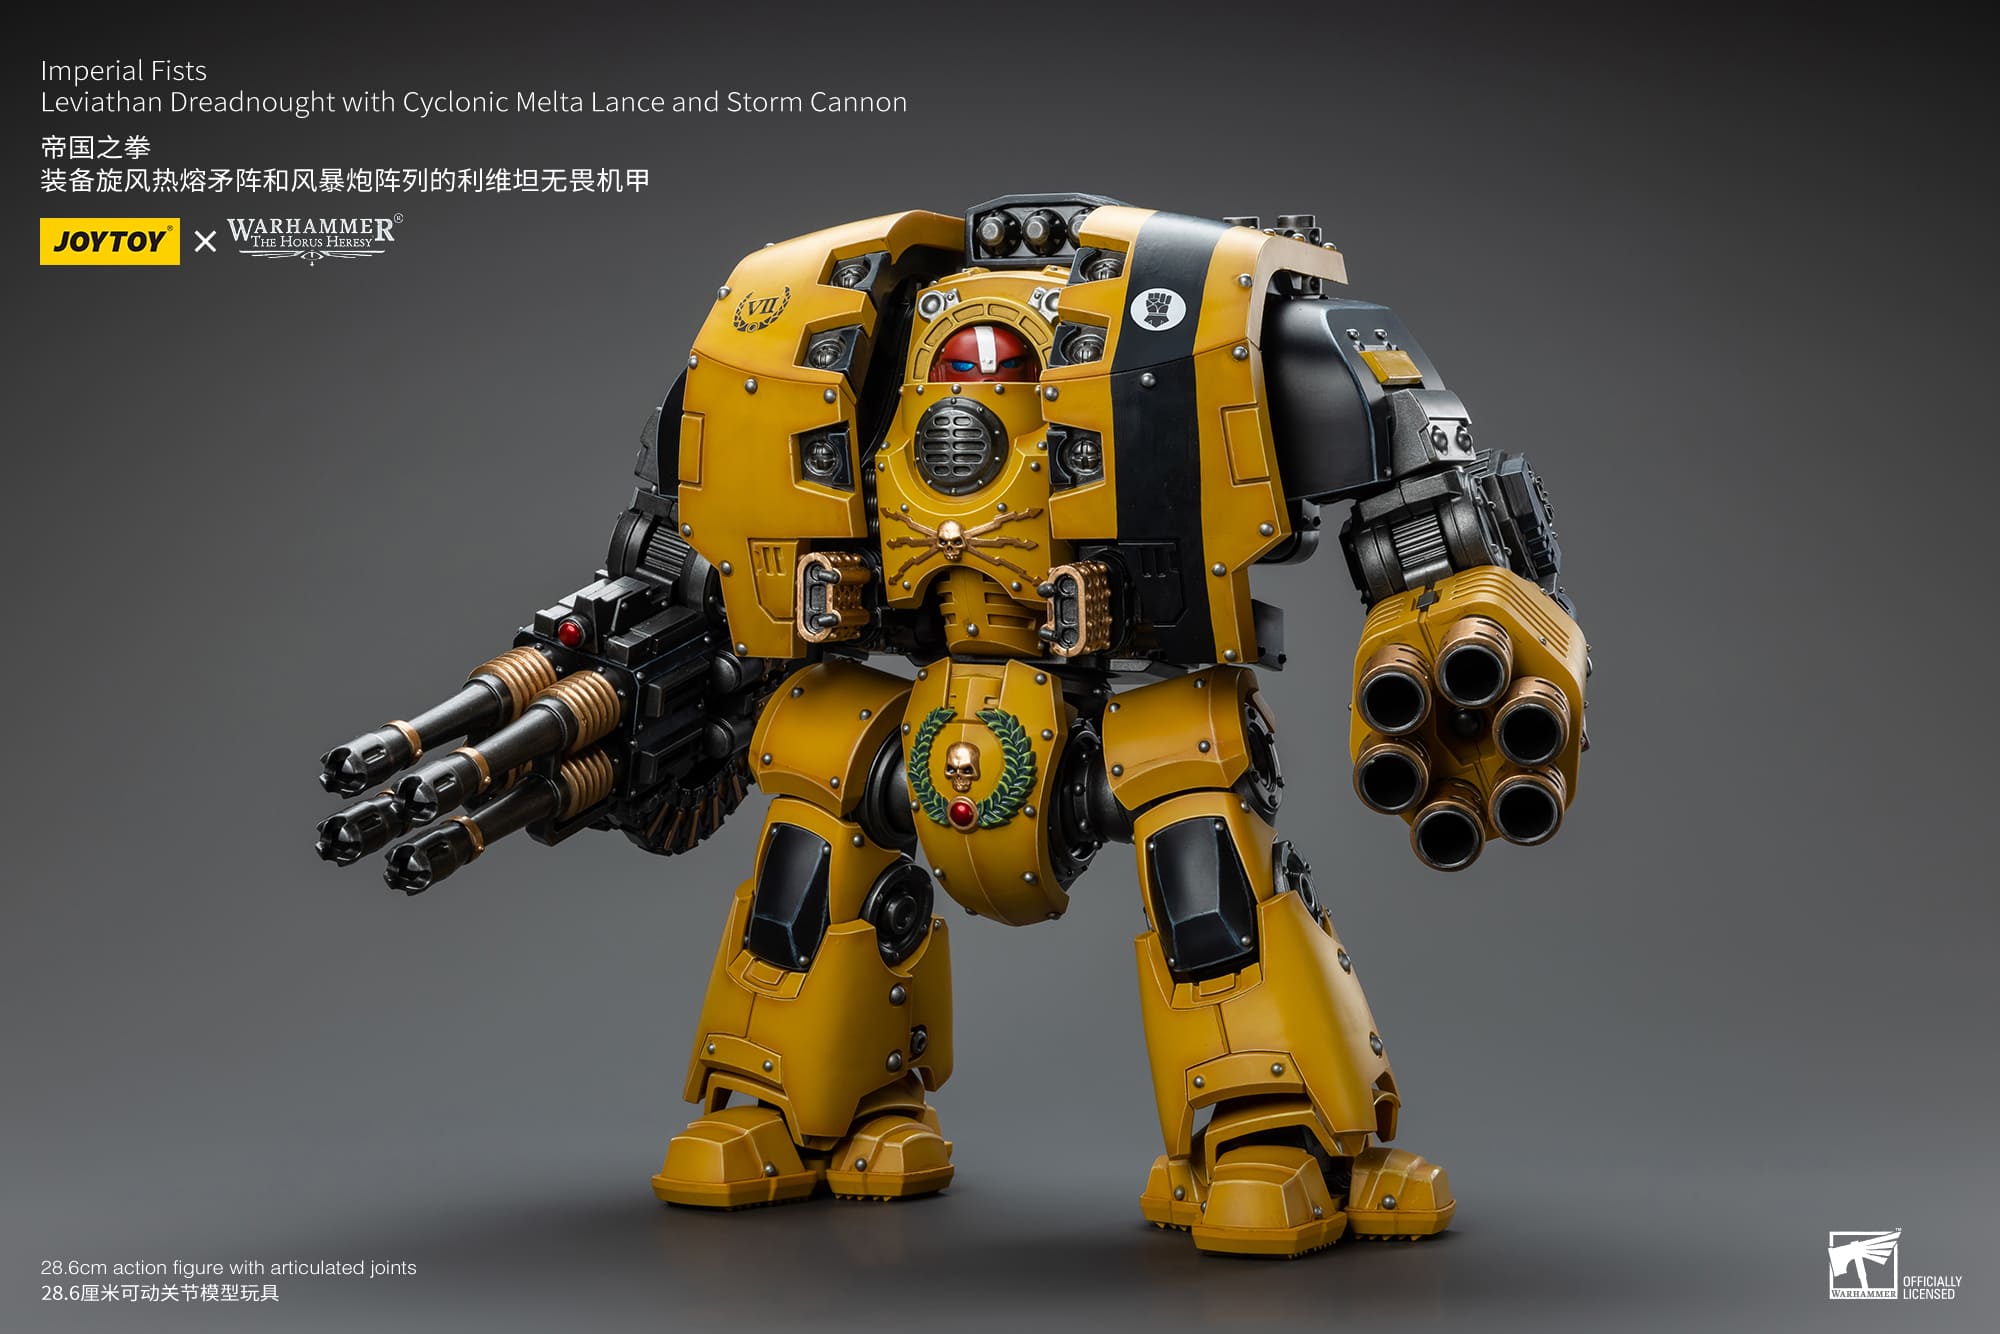 JOYTOY WH40K Imperial Fists Leviathan Dreadnought with Cyclonic Melta Lance and Storm Cannon 2